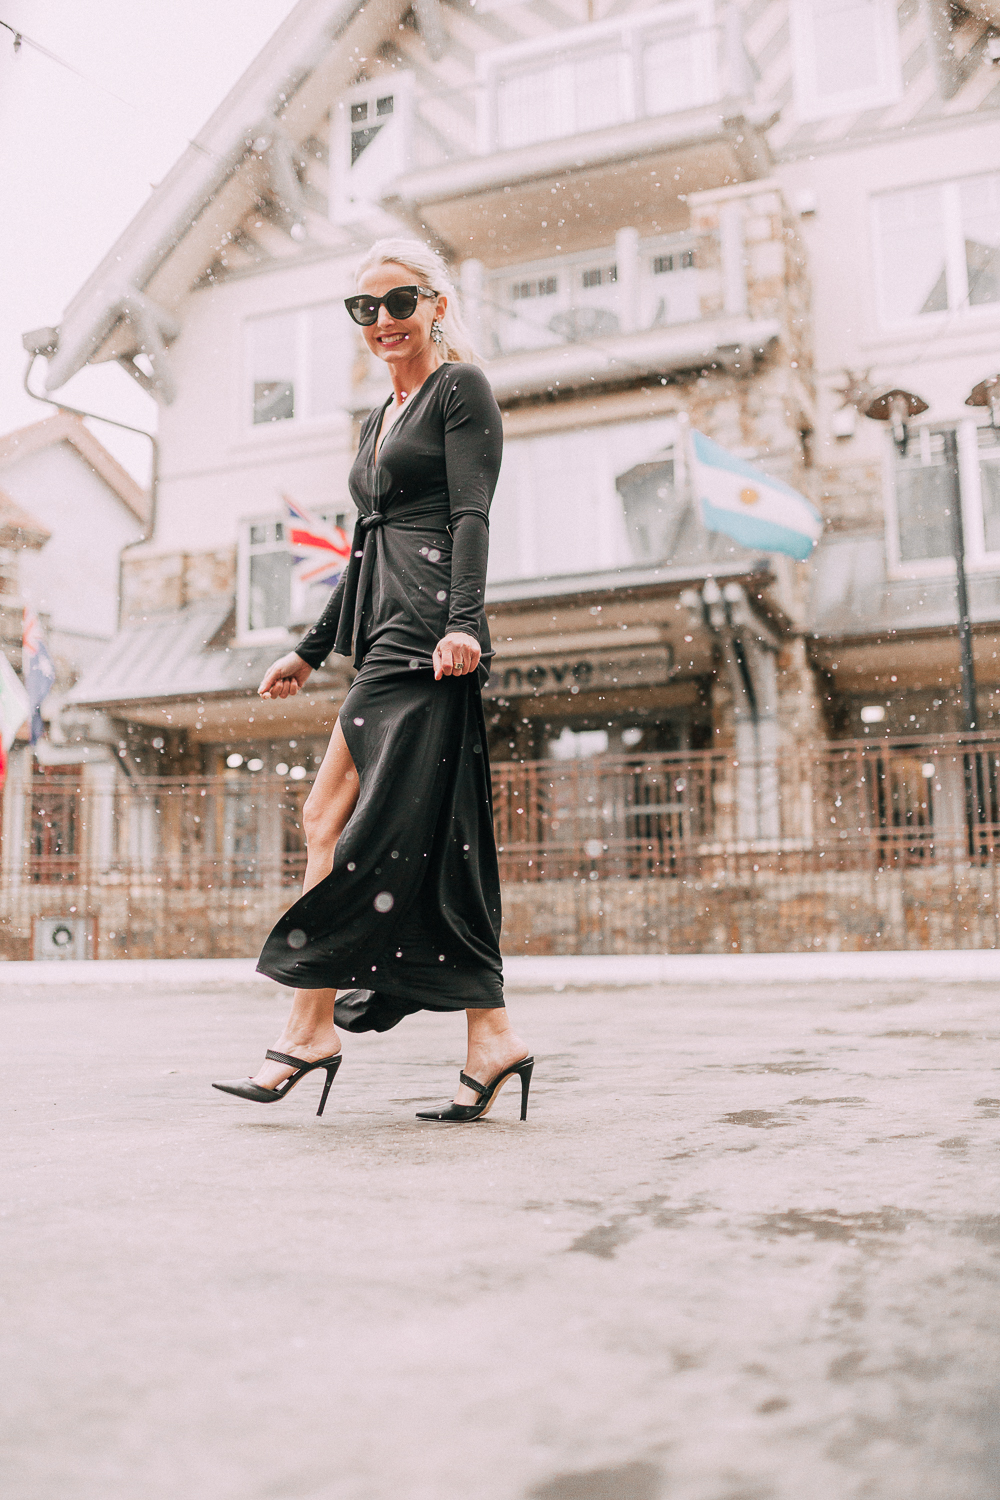 Unexpected holiday party outfits featuring a long black maxi dress with high slit to show off legs and a knot under the bust on blonde fashion blogger in telluride, colorado in the snow